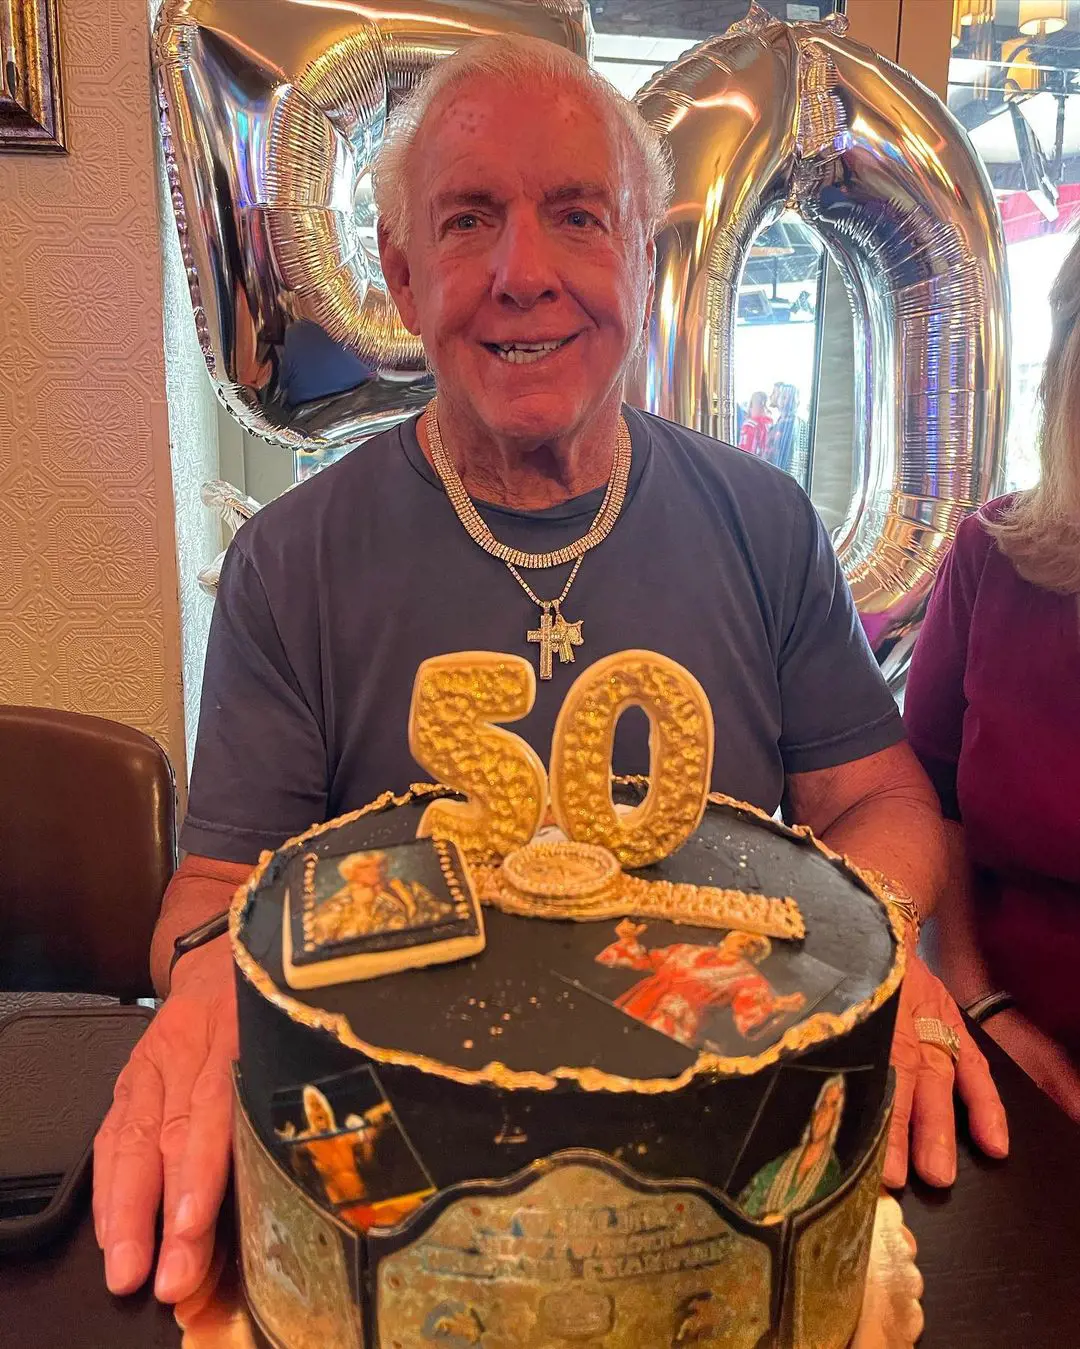 Ric flair celebrated his fifty year in business.